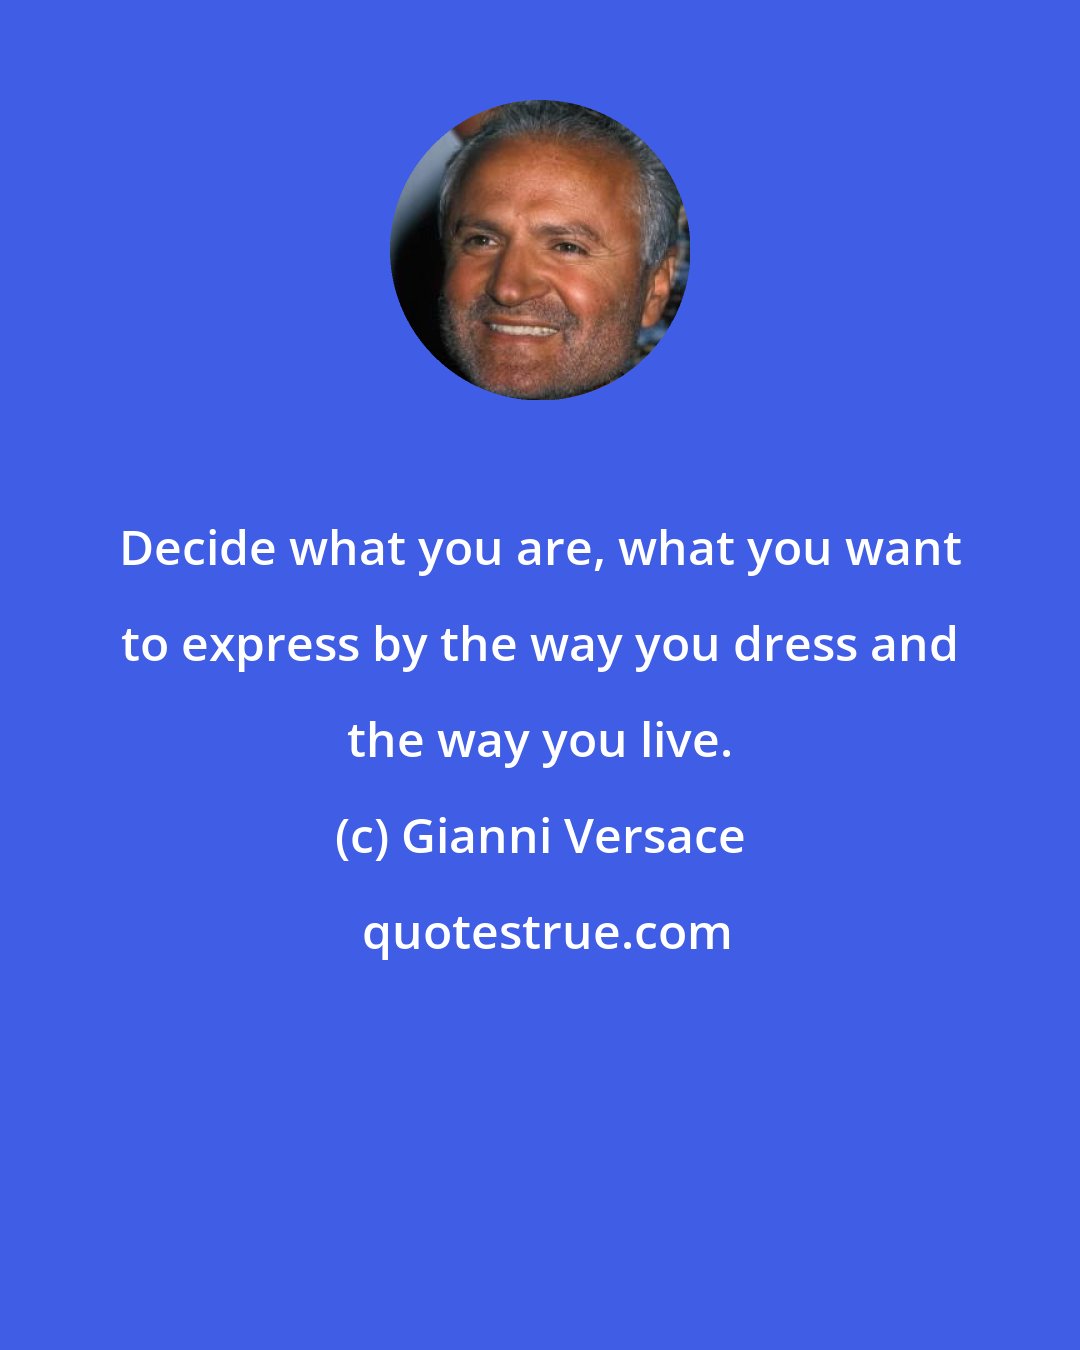 Gianni Versace: Decide what you are, what you want to express by the way you dress and the way you live.